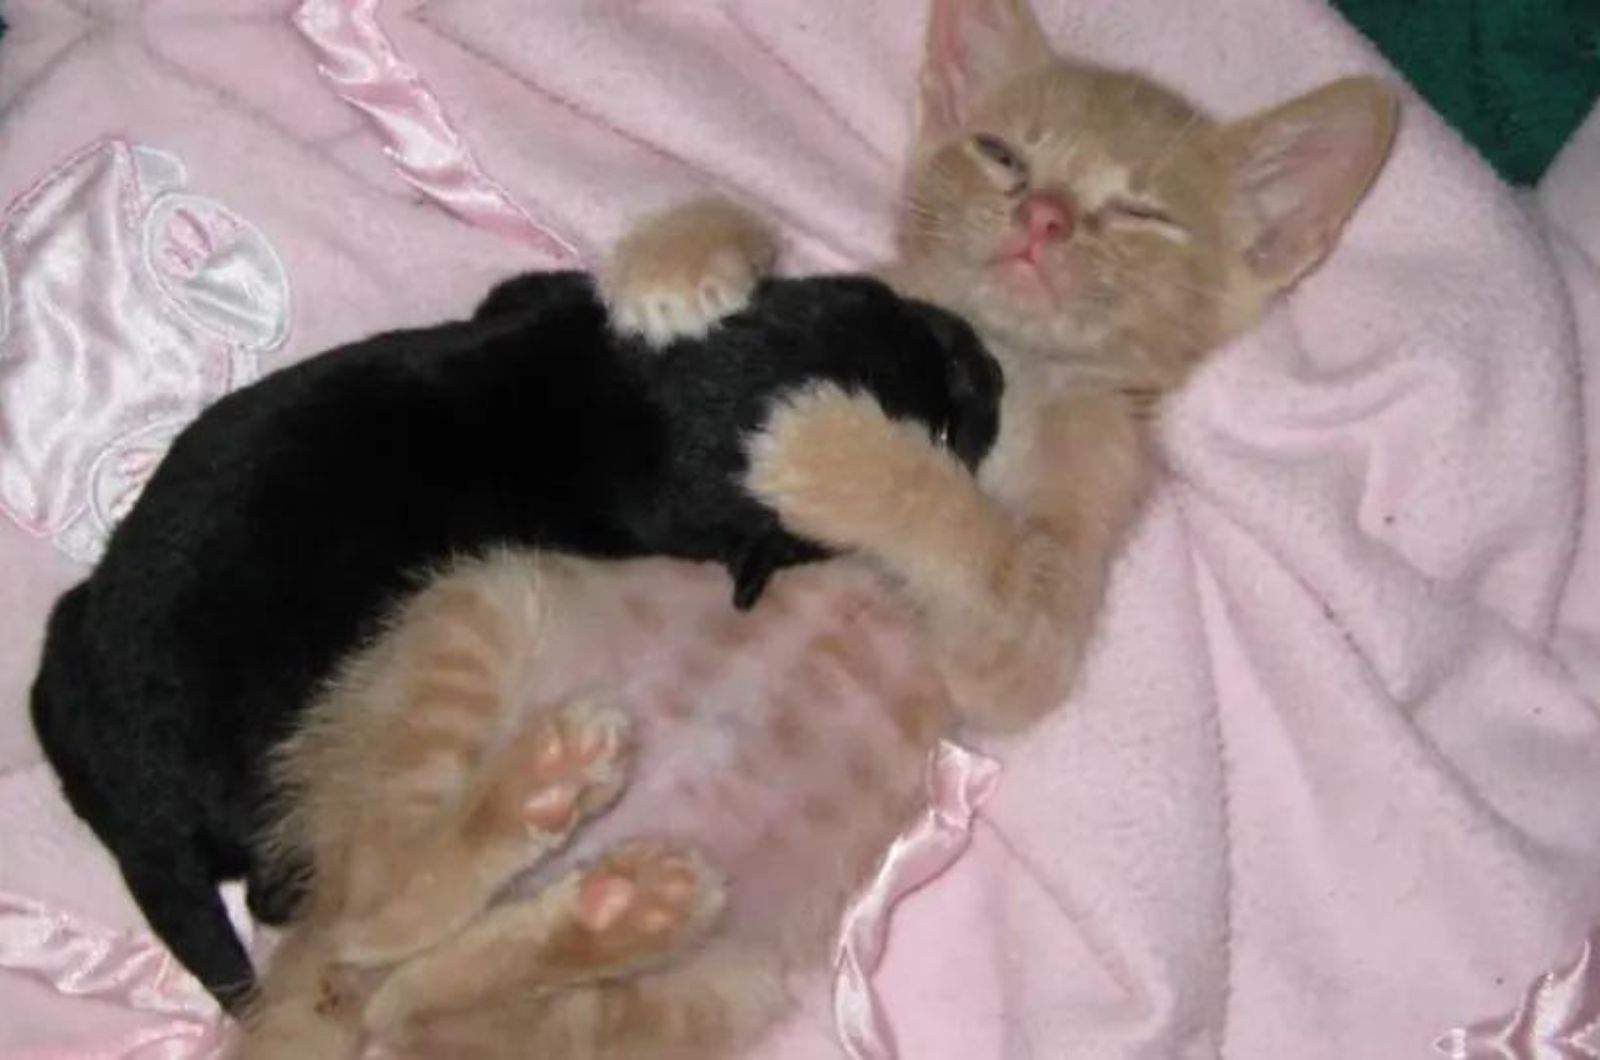 the kitten is lying on its back while the puppy is on its chest